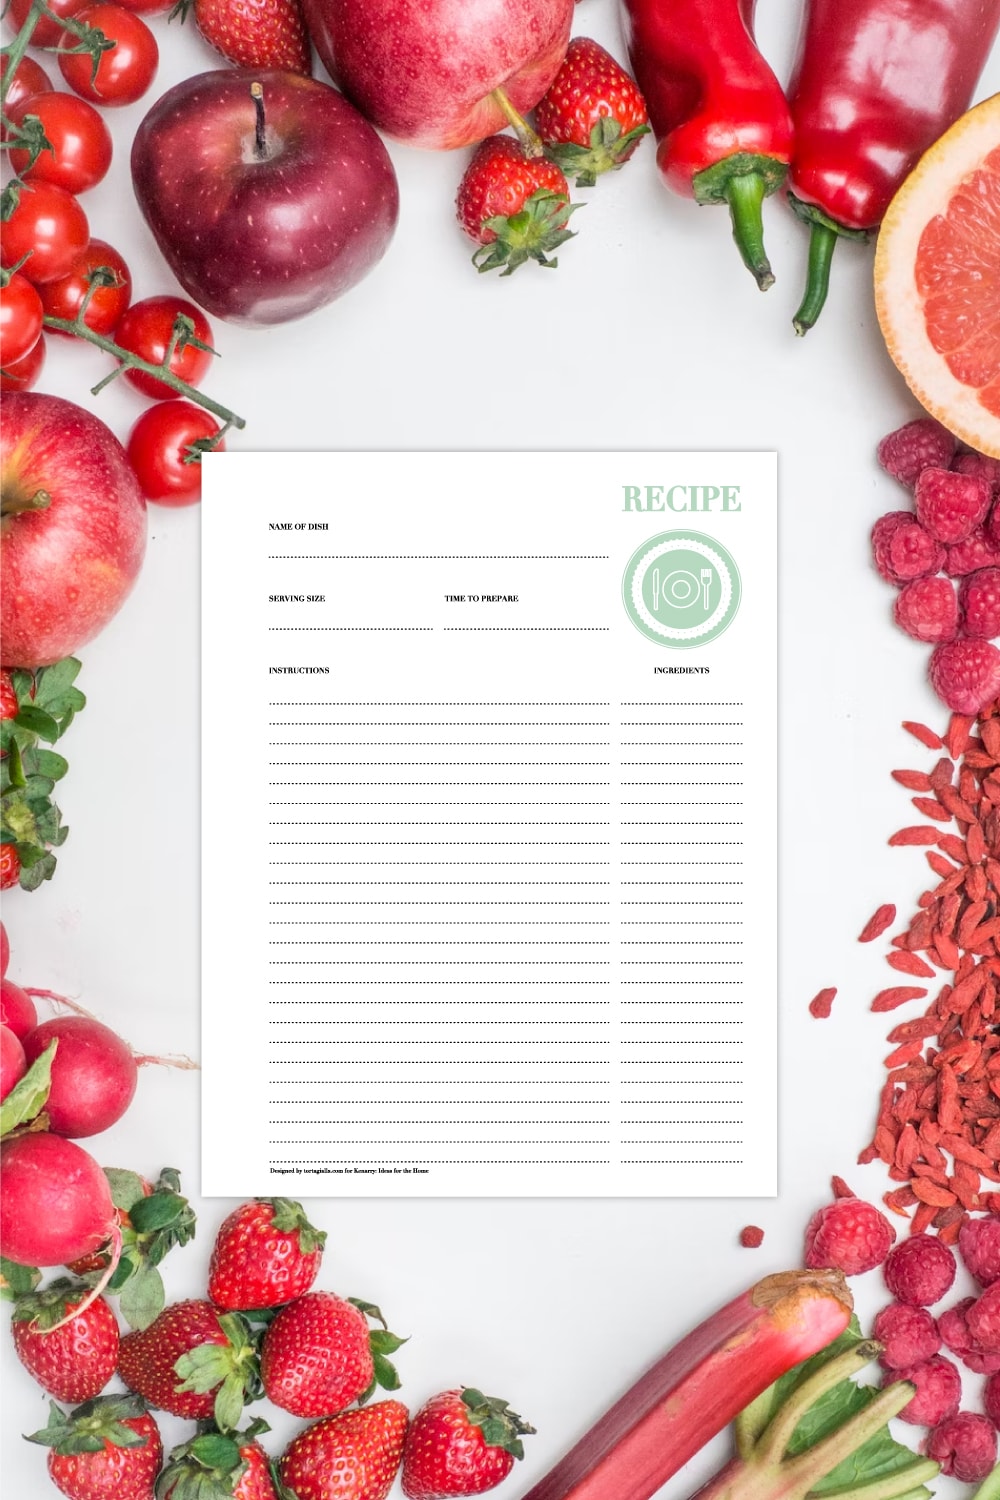 Preview of green recipe template page on white background with red fruits and vegetables creating a border all around.